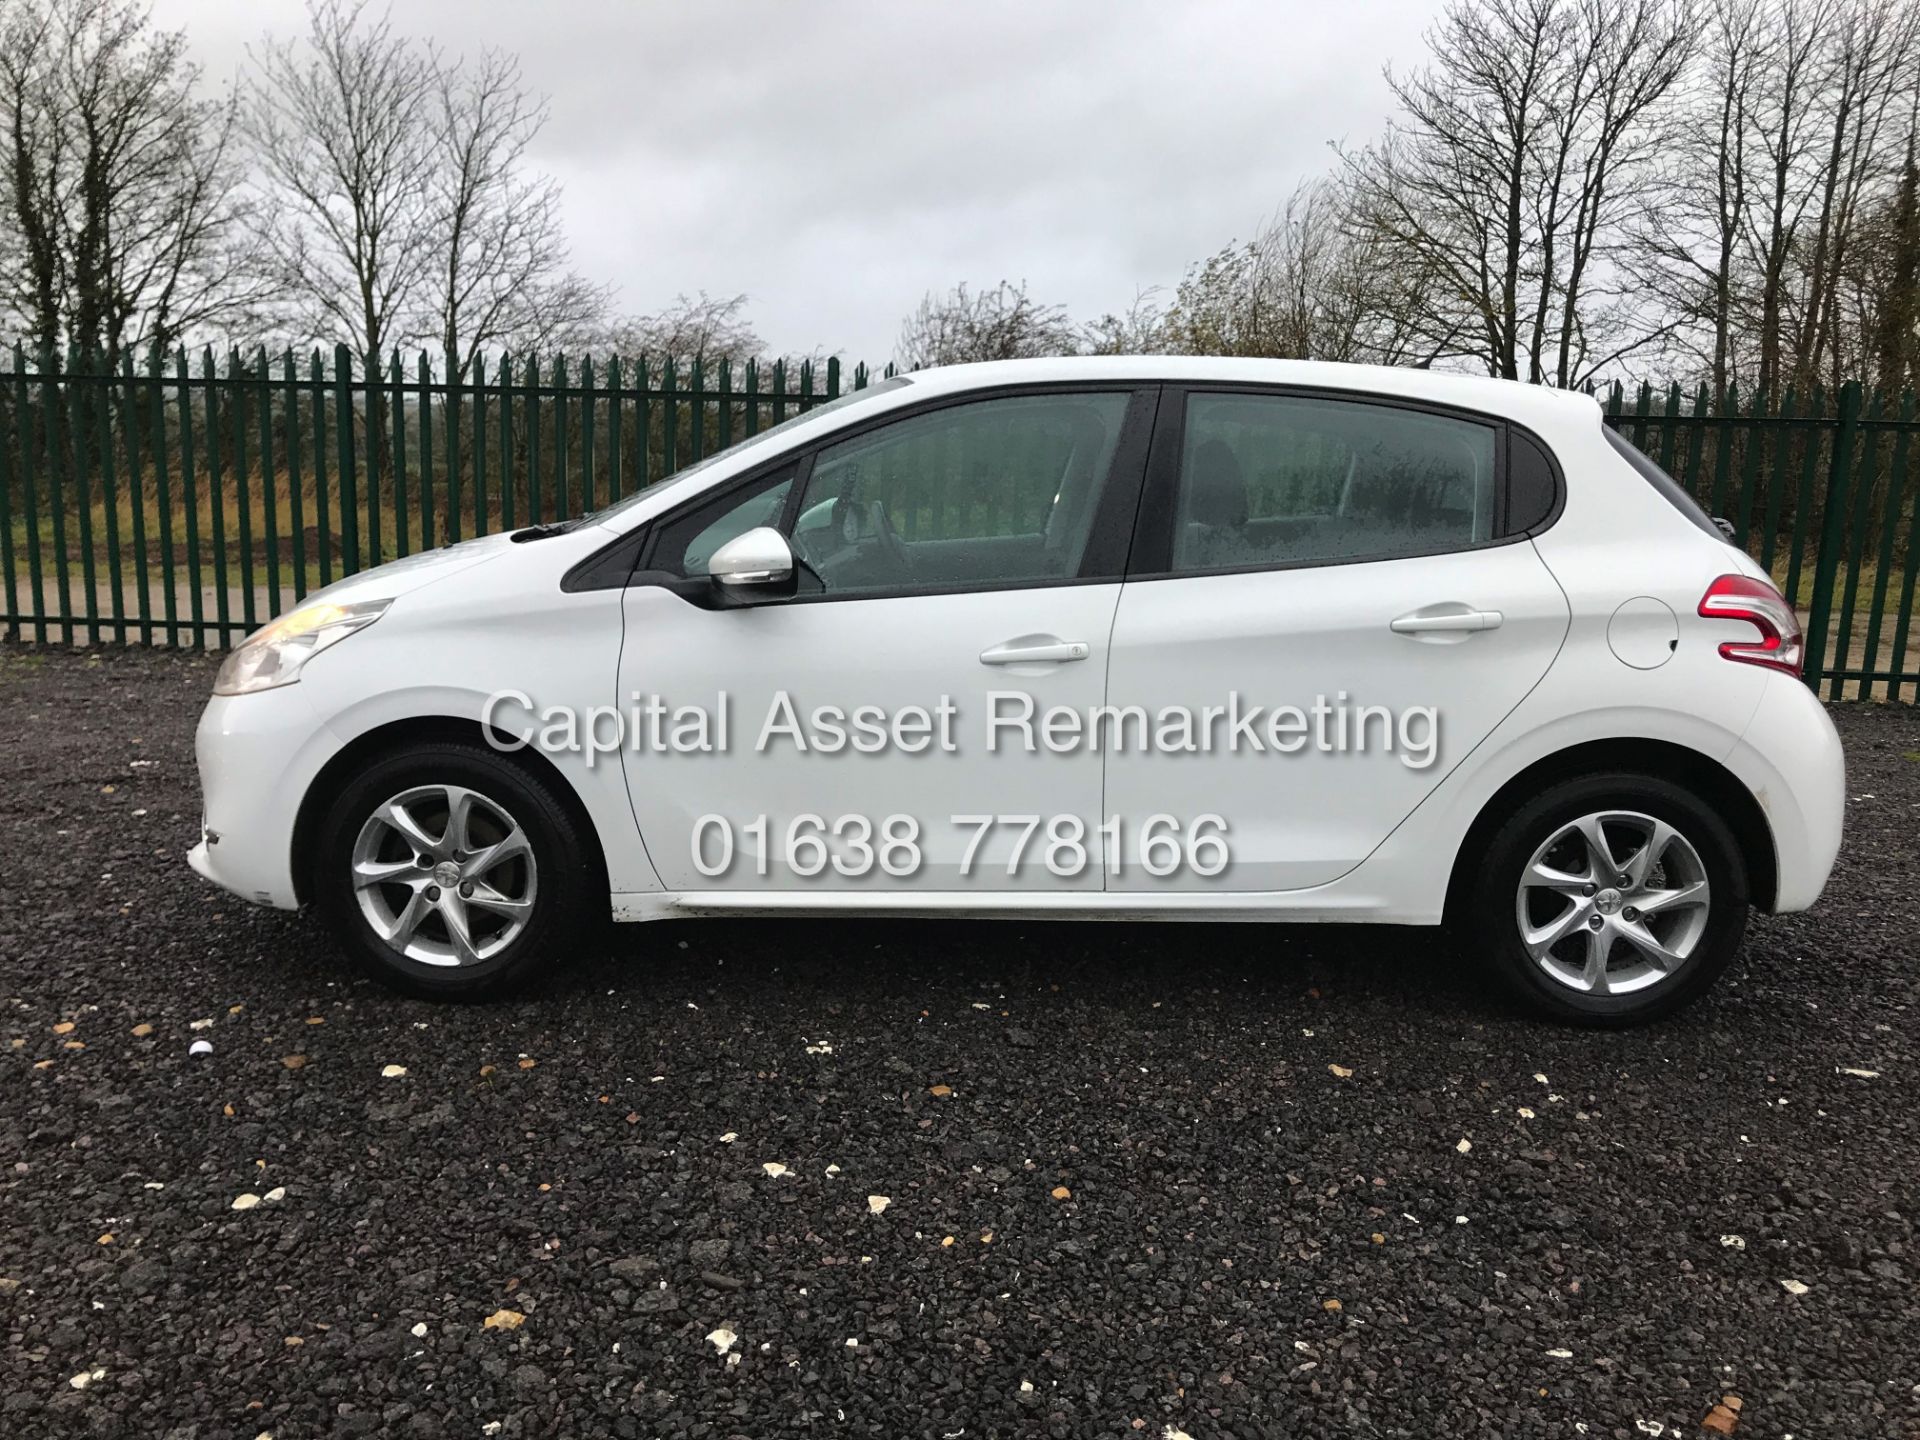 (ON SALE) PEUGEOT 208 1.4HDI "ACTIVE" 1 PREVIOUS KEEPER FSH (14 REG) RECENT SERVICE-AIR CON *NO VAT* - Image 6 of 23